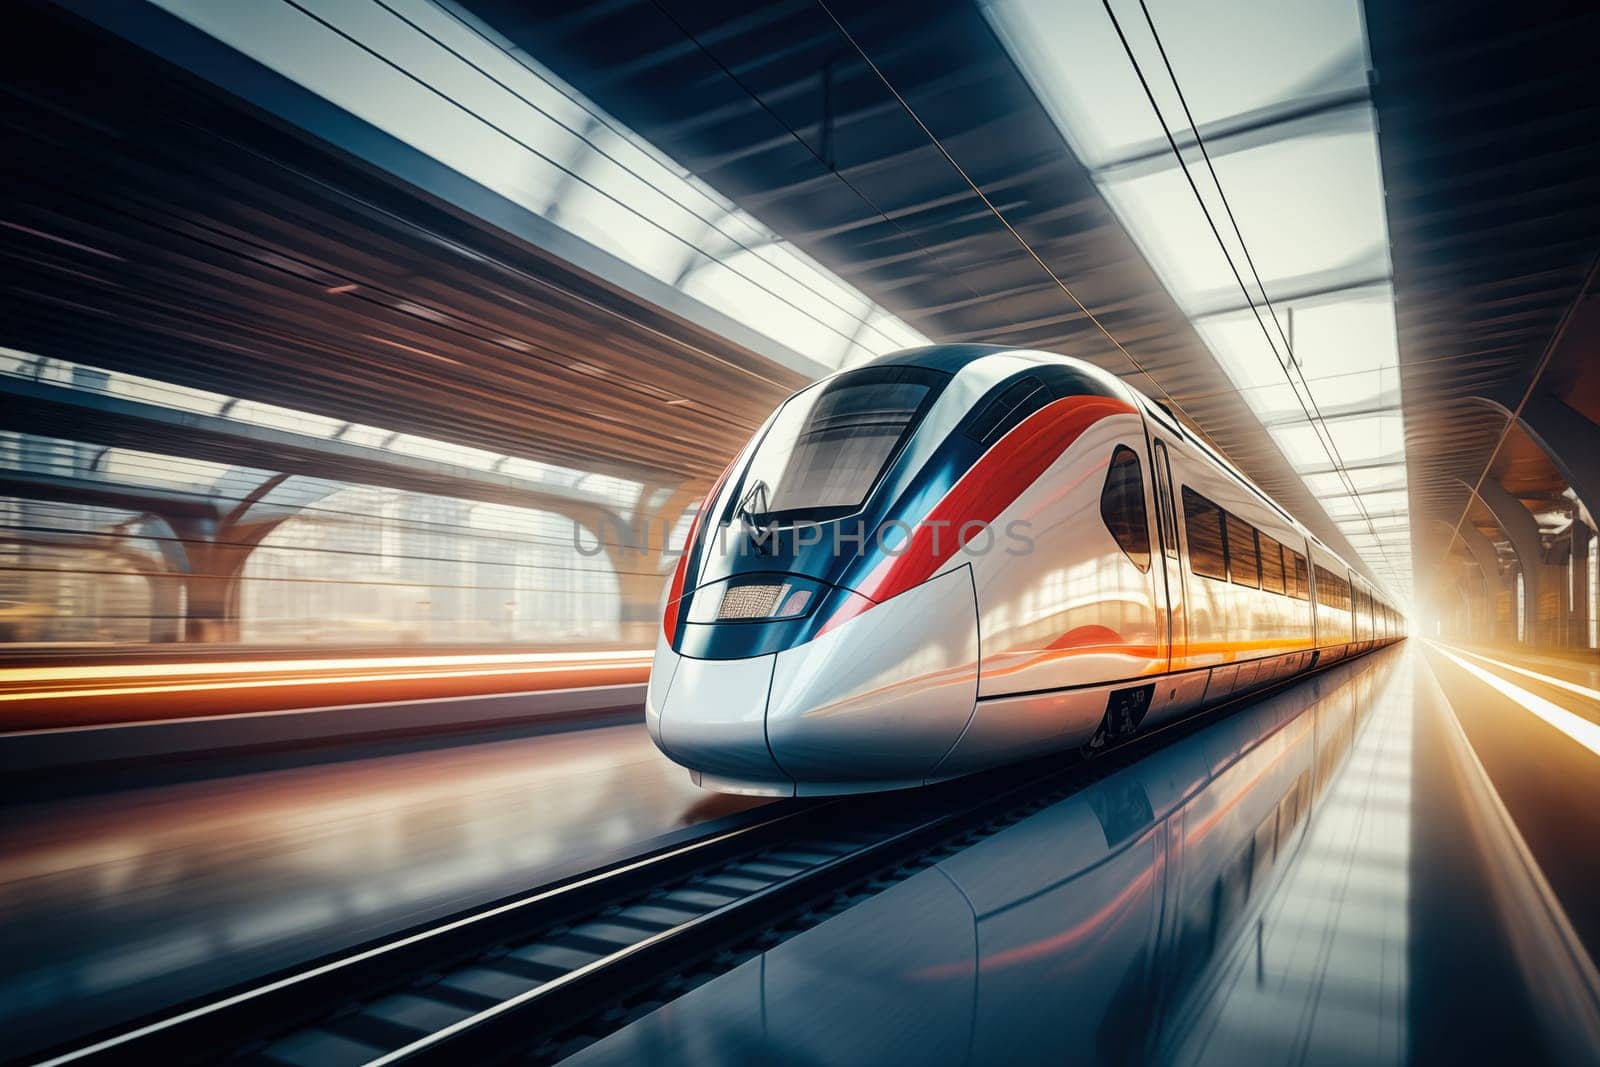 Modern high speed train in a futuristic train station. Modern transportation technology, speed, travel concepts. Railroad with motion blur effect